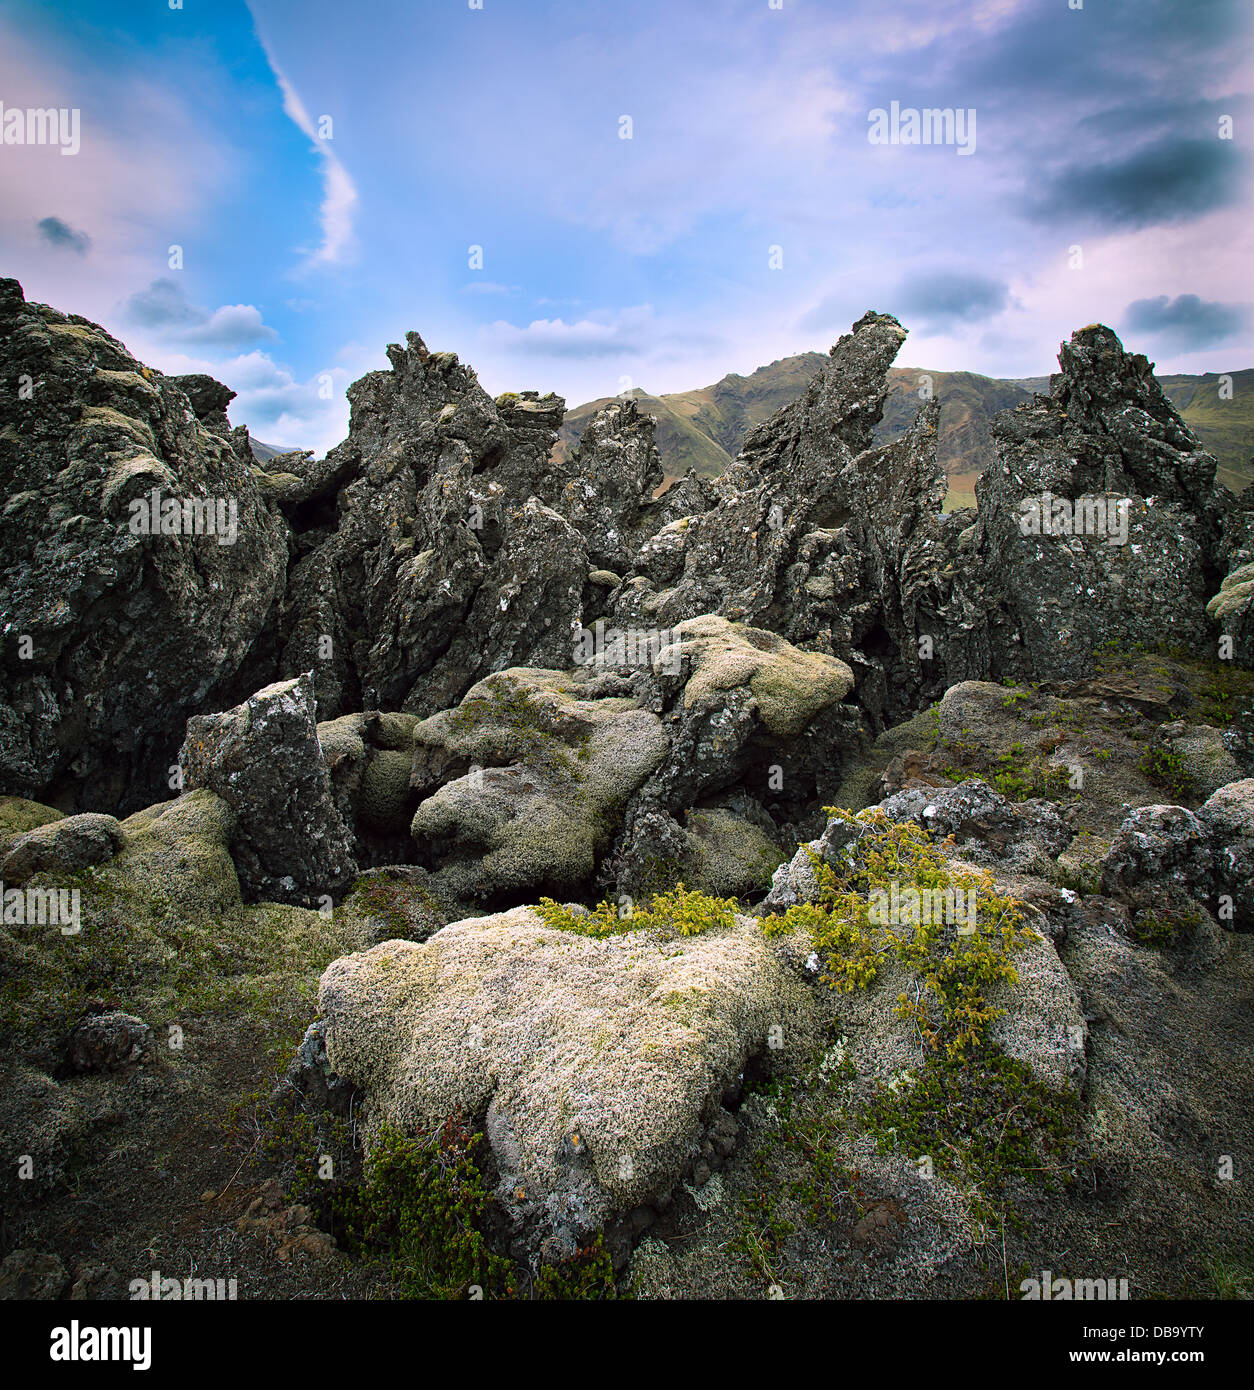 Lava field in Iceland volcanic landscape black basalt rock covered with moss Stock Photo